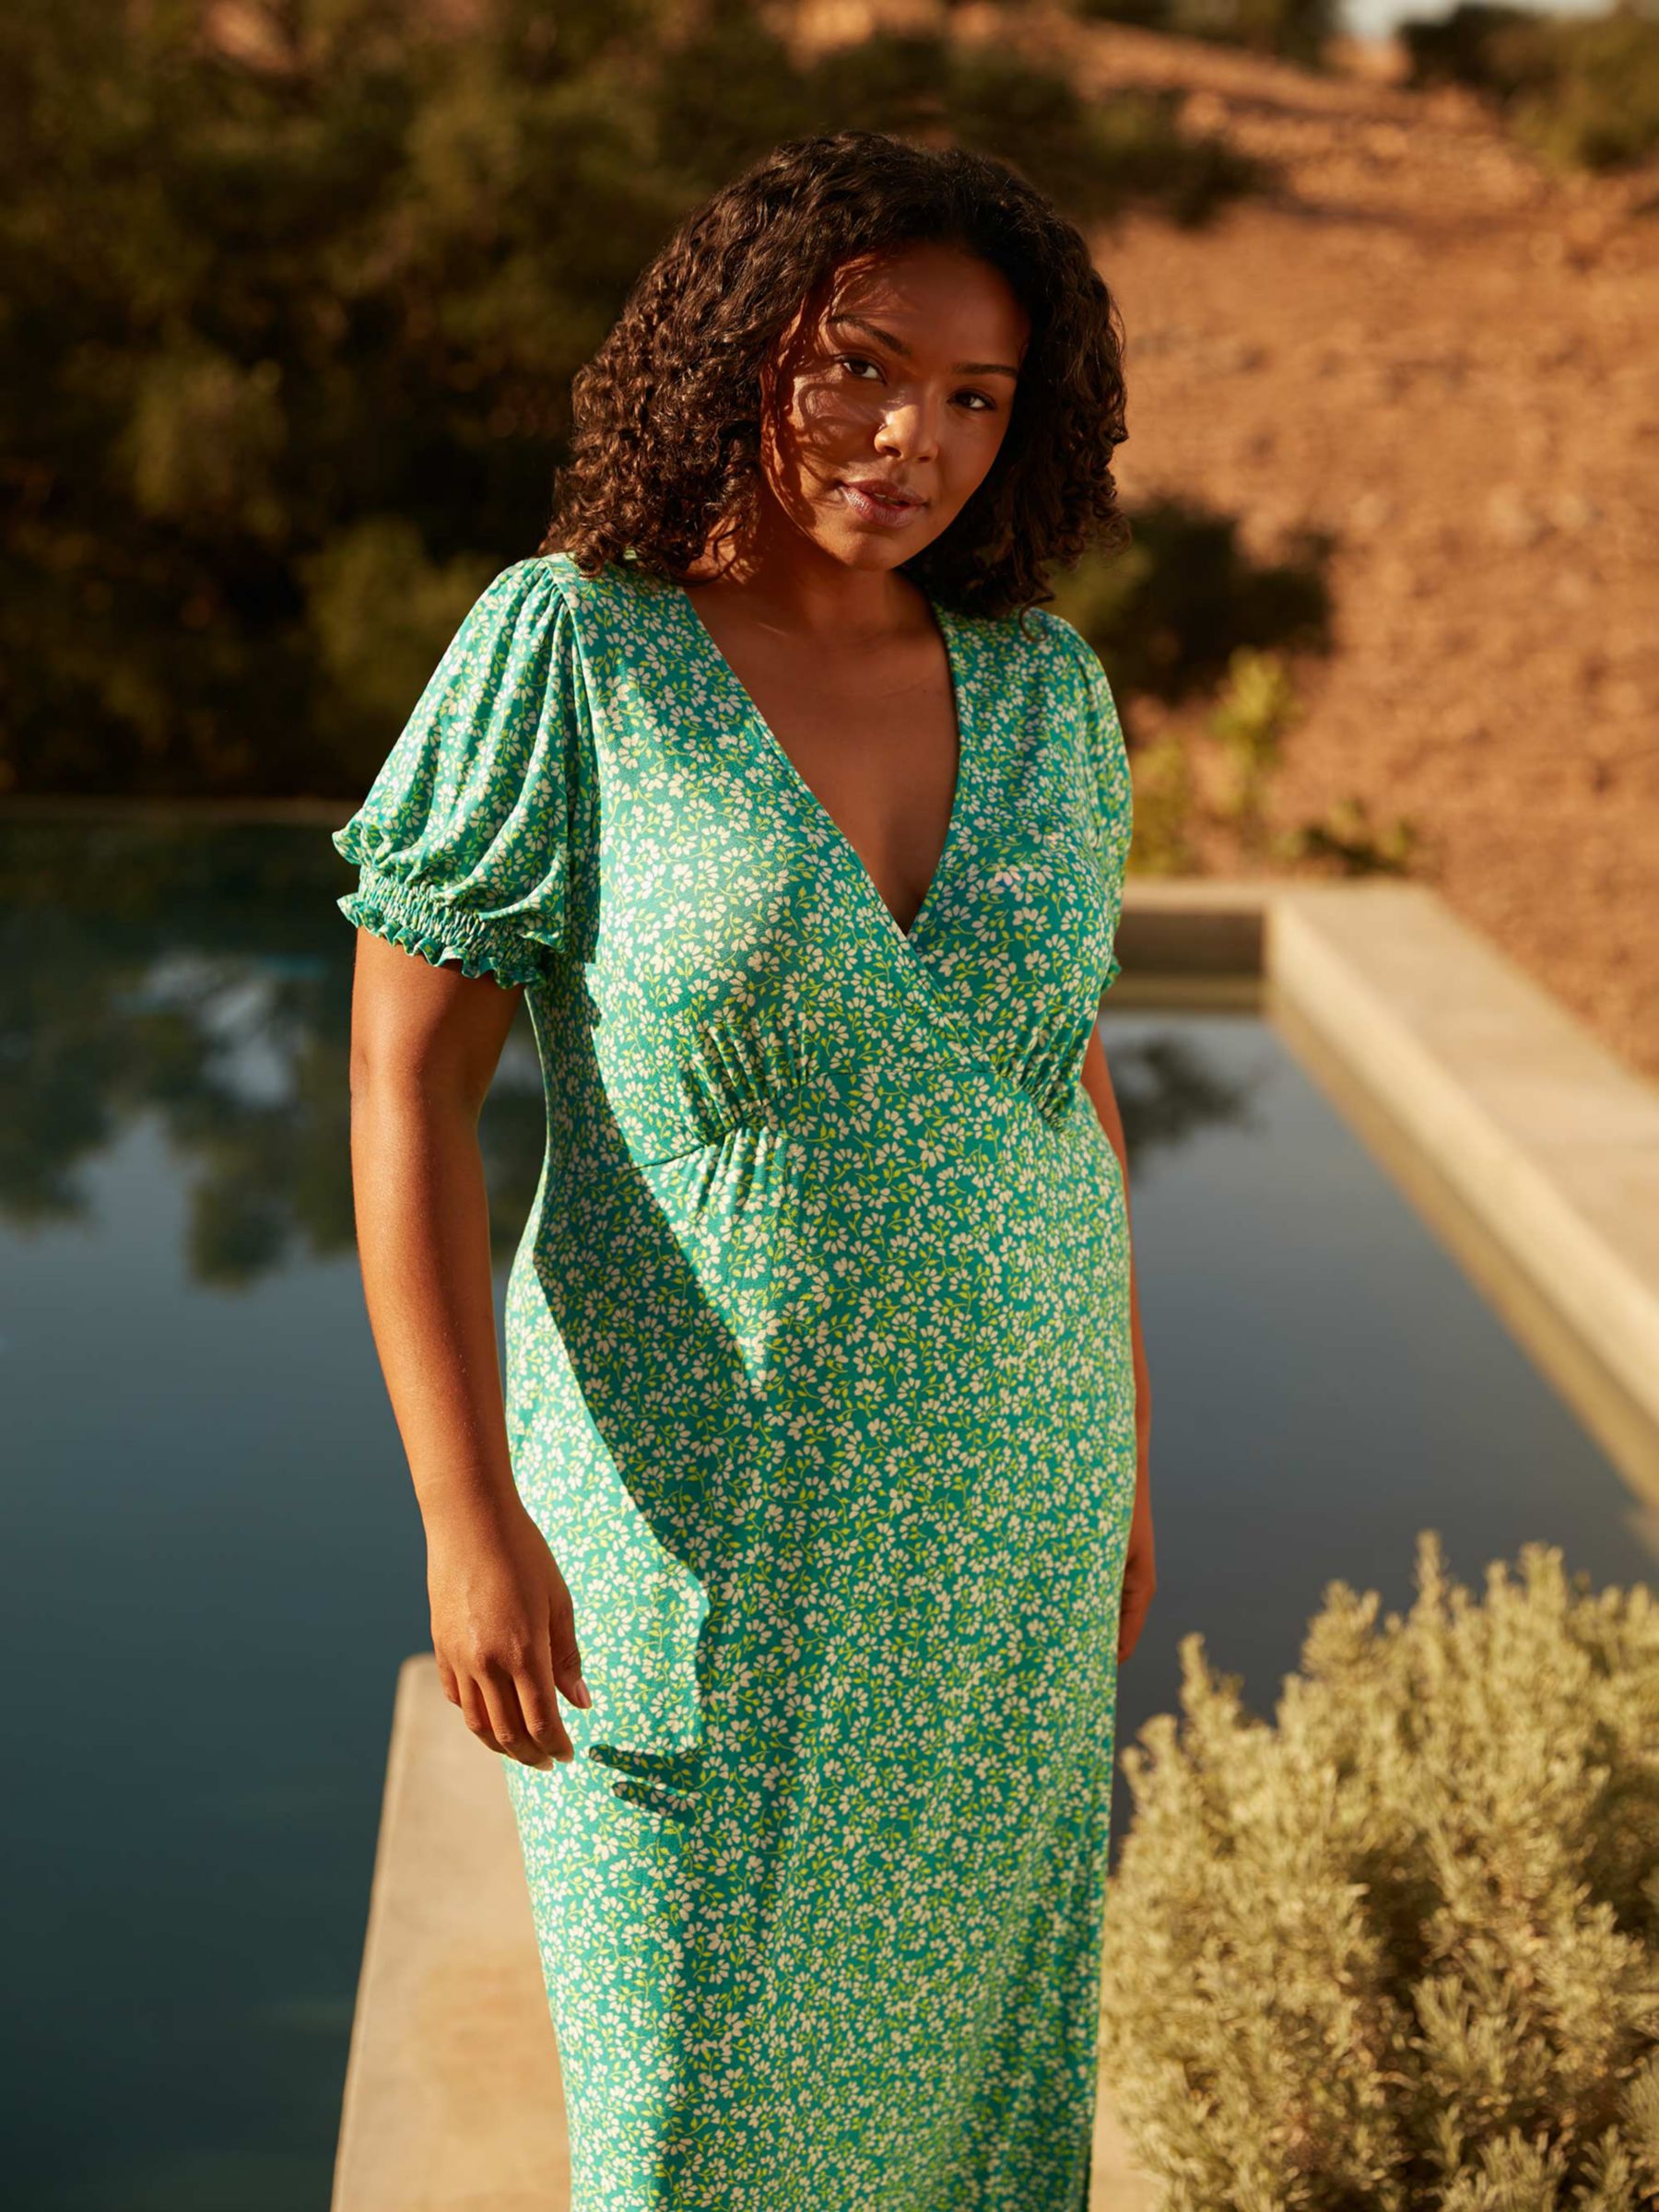 Buy Live Unlimited Curve Ditsy Jersey Shirred Cuff Maxi Dress, Green Online at johnlewis.com